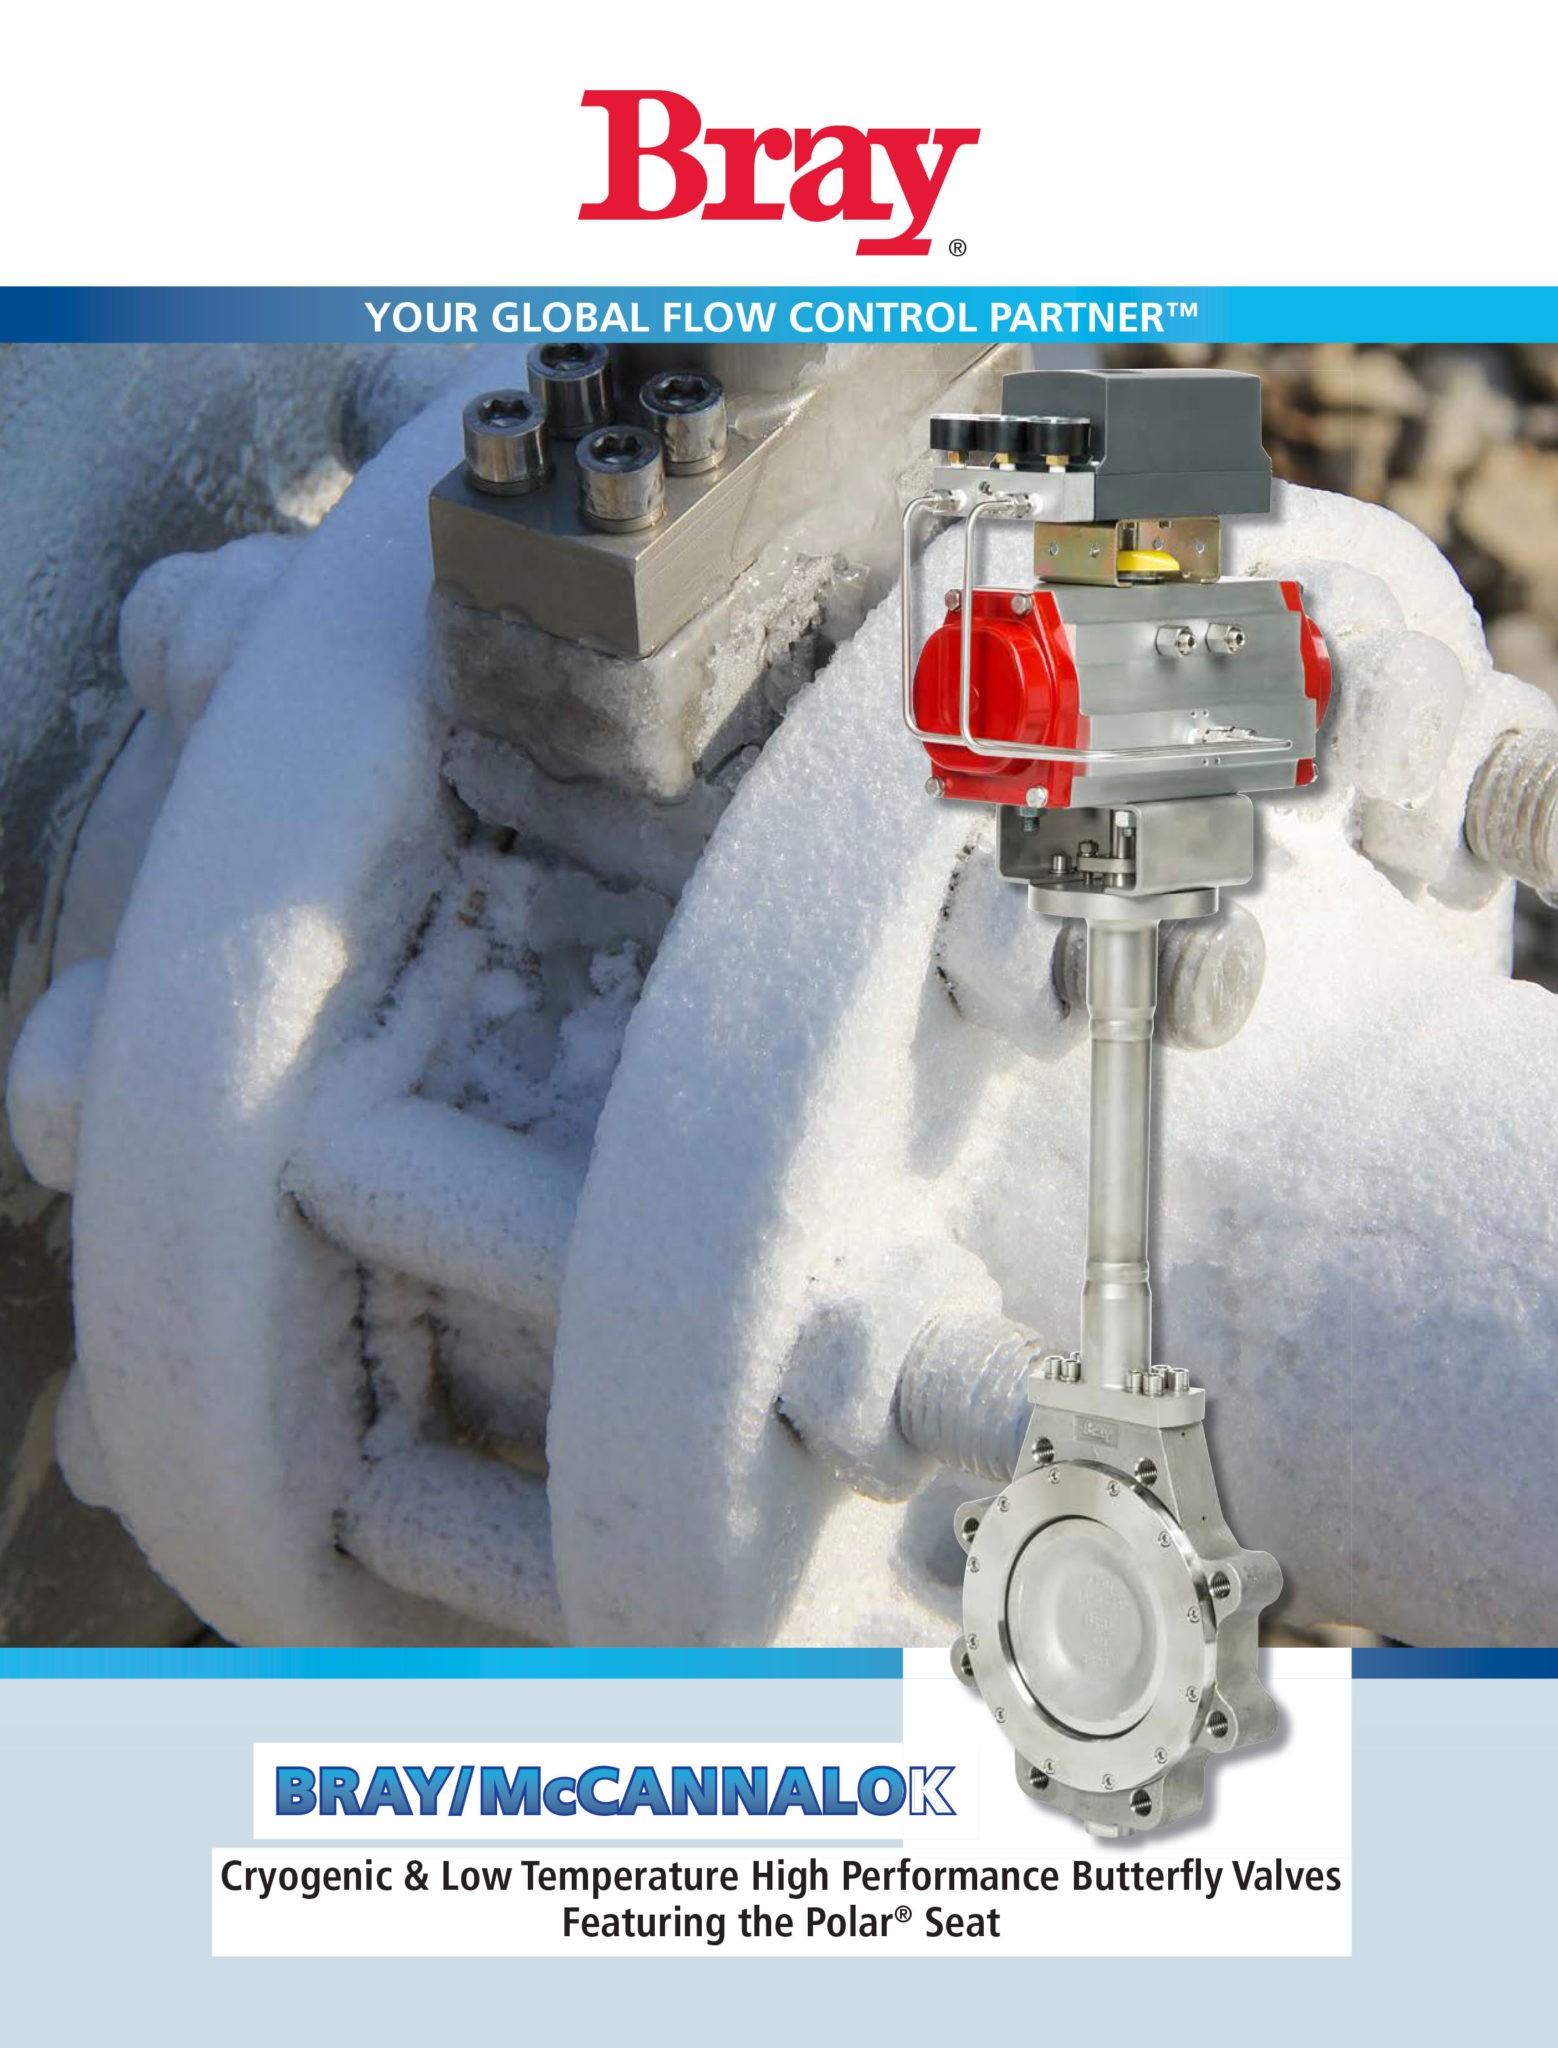 Cryogenic & Low Temperature High Performance Butterfly Valves